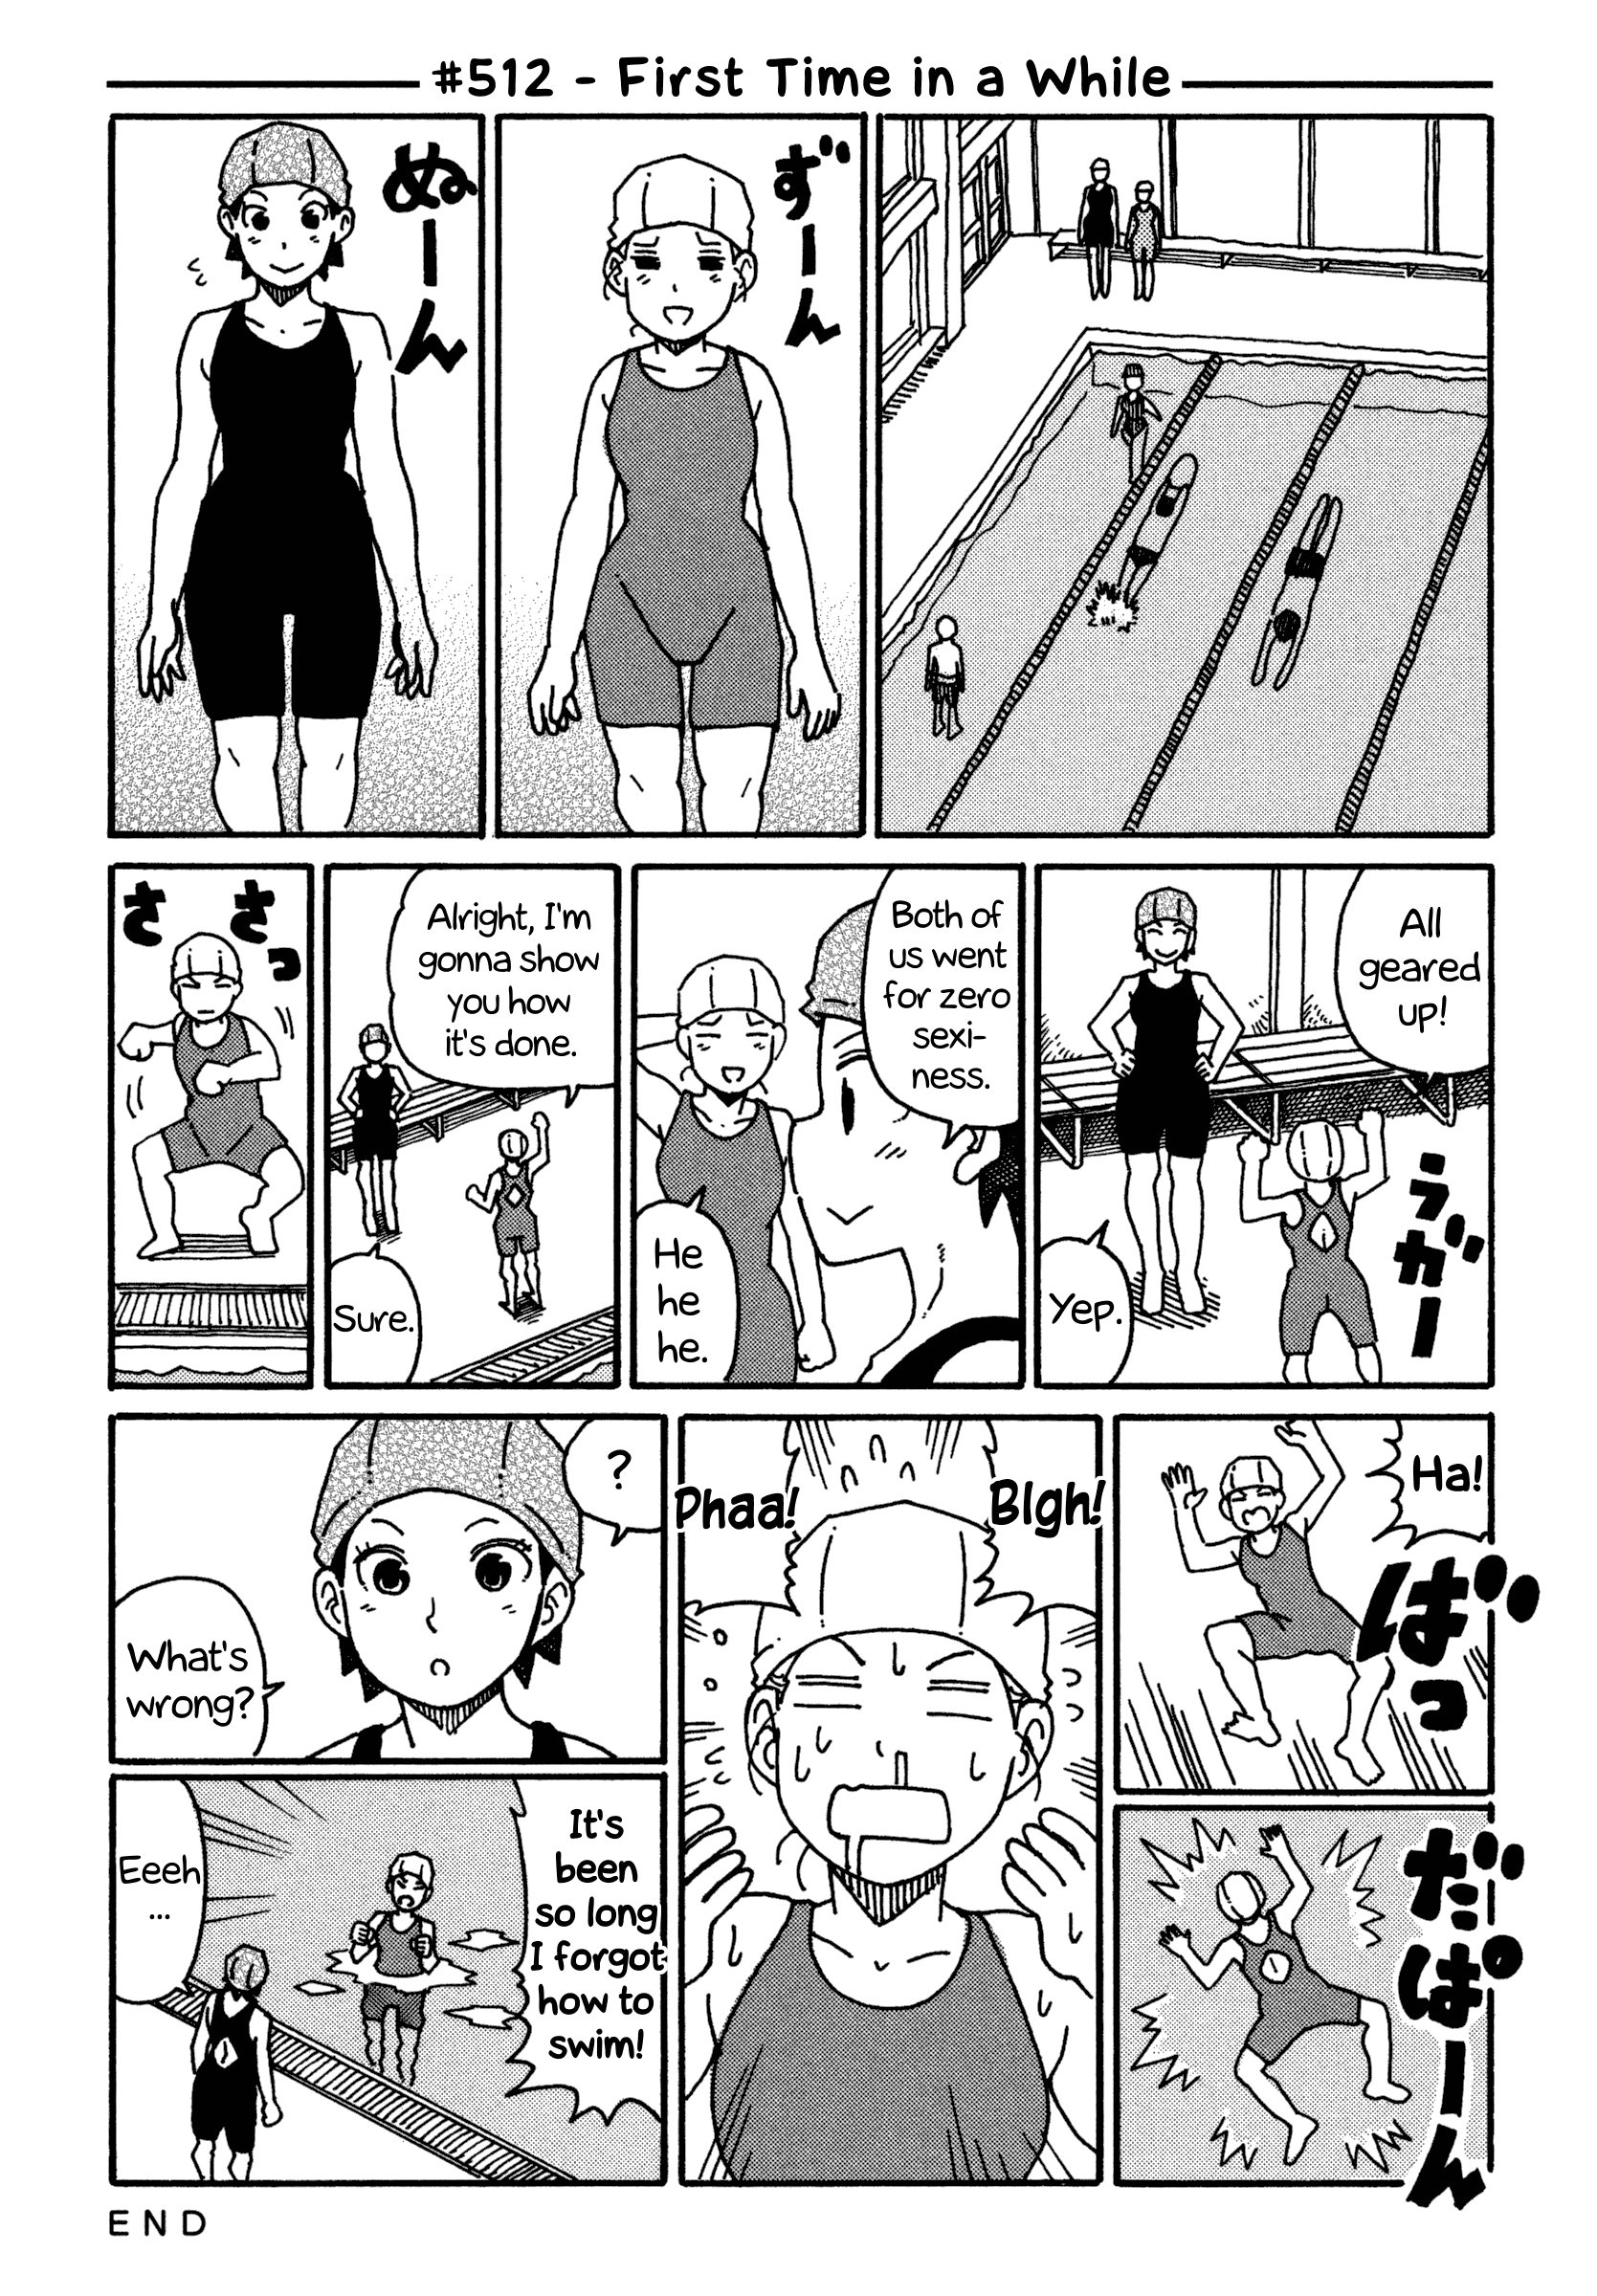 Hatarakanai Futari (The Jobless Siblings) Vol.9 Chapter 512: First Time in a While